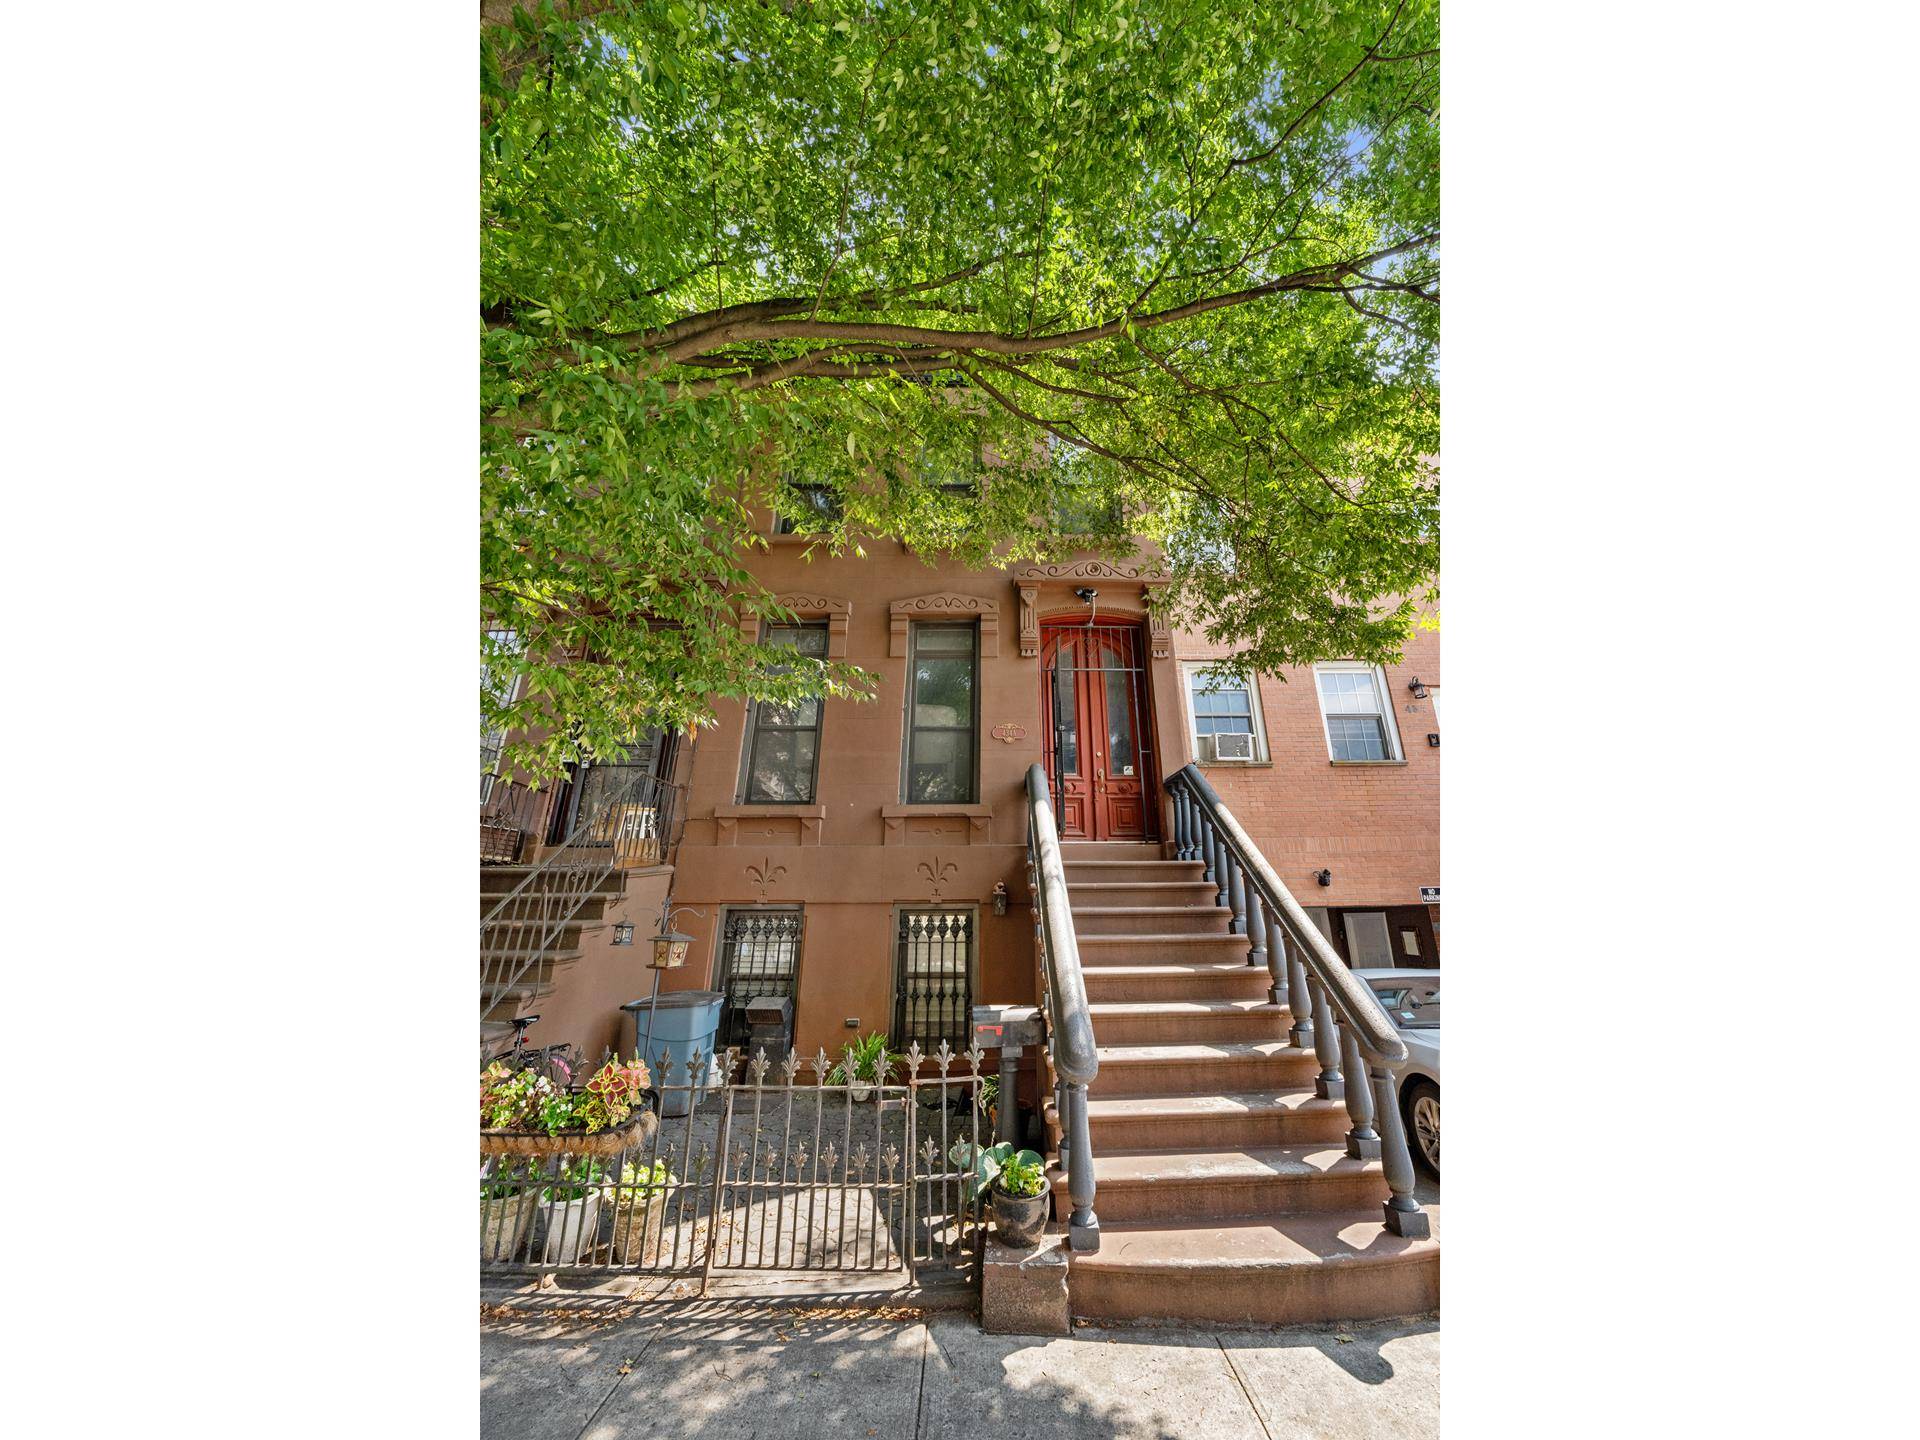 434A Lexington Avenue Unit 1 is a newly renovated 2 bed, 1 bath unit within a classic Bed Stuy Two family Brownstone.